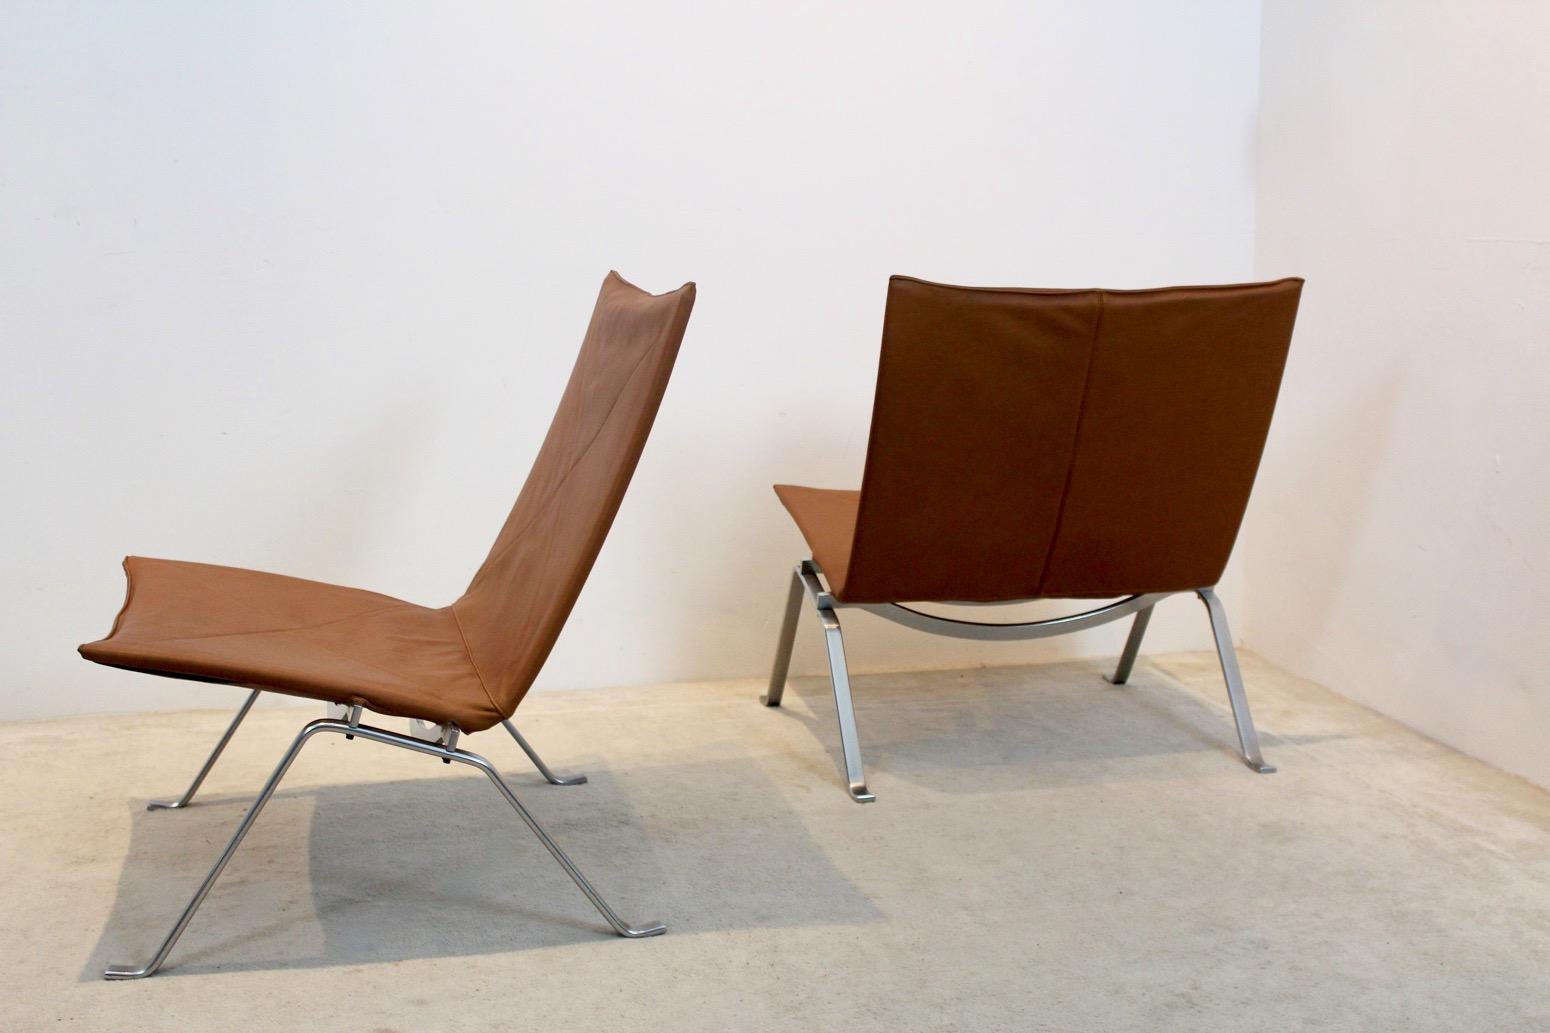 Exquisite Cognac Leather PK22 chairs by Poul Kjærholm for E. Kold Christensen In Good Condition For Sale In Voorburg, NL